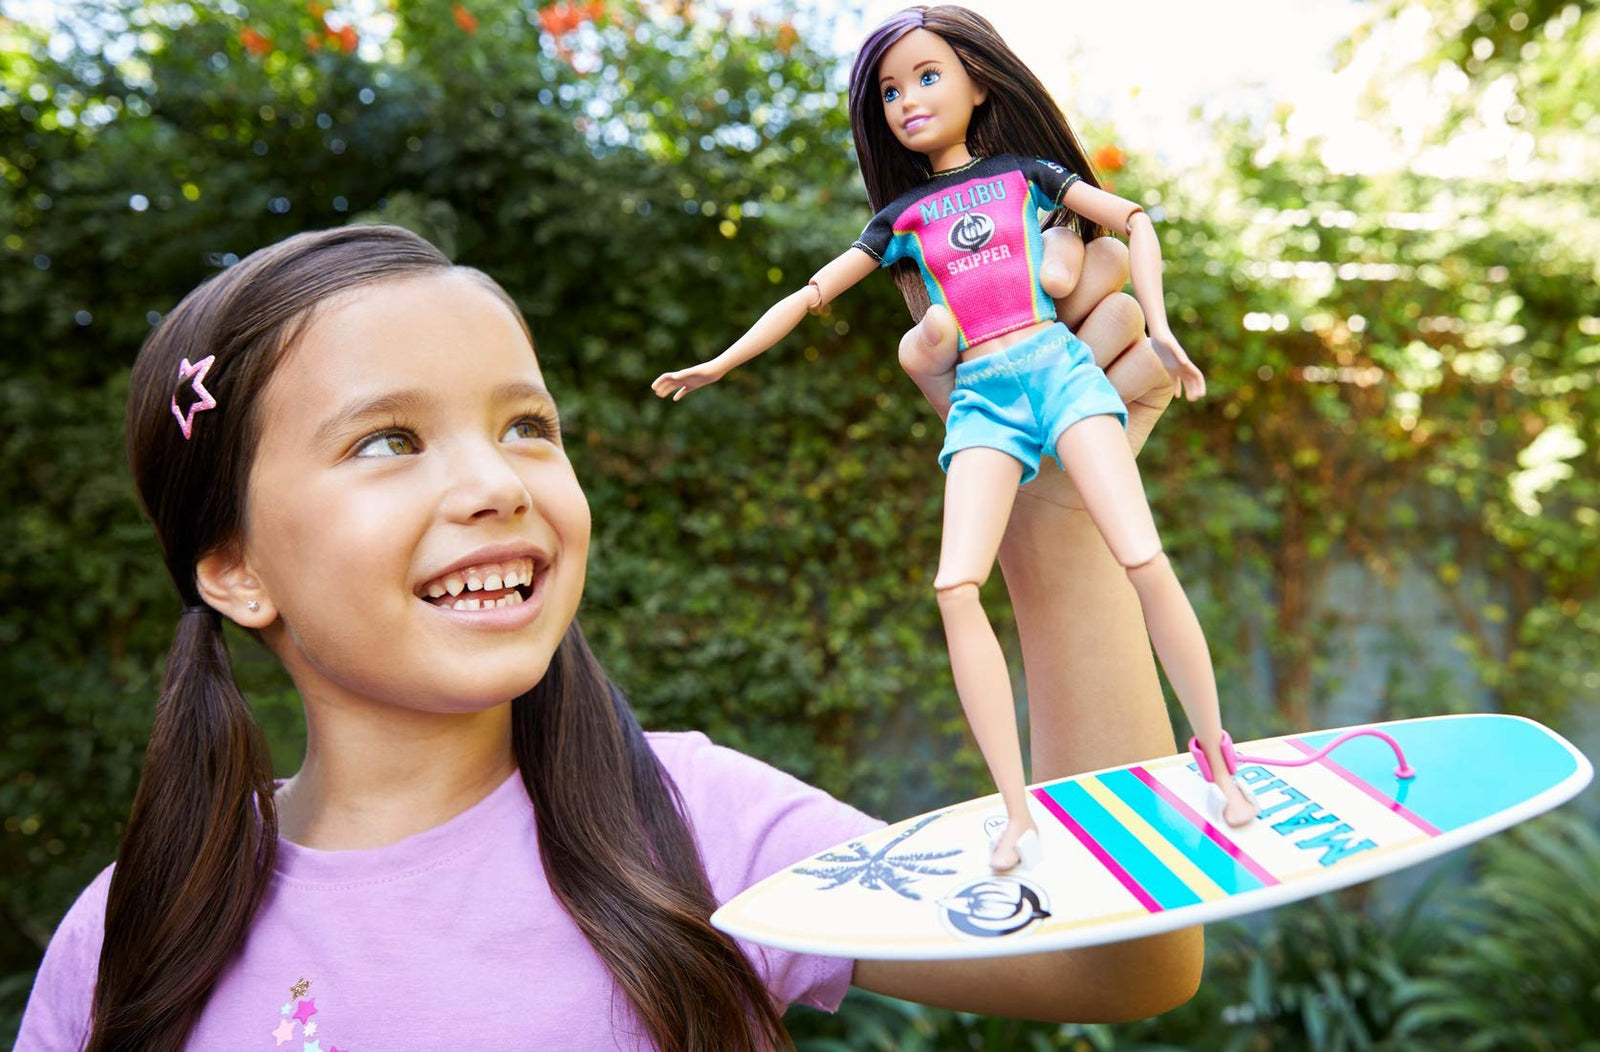 Barbie Dreamhouse Adventures Skipper Surf Doll, approx. 11-inch in Surfing Fashion, with Accessories